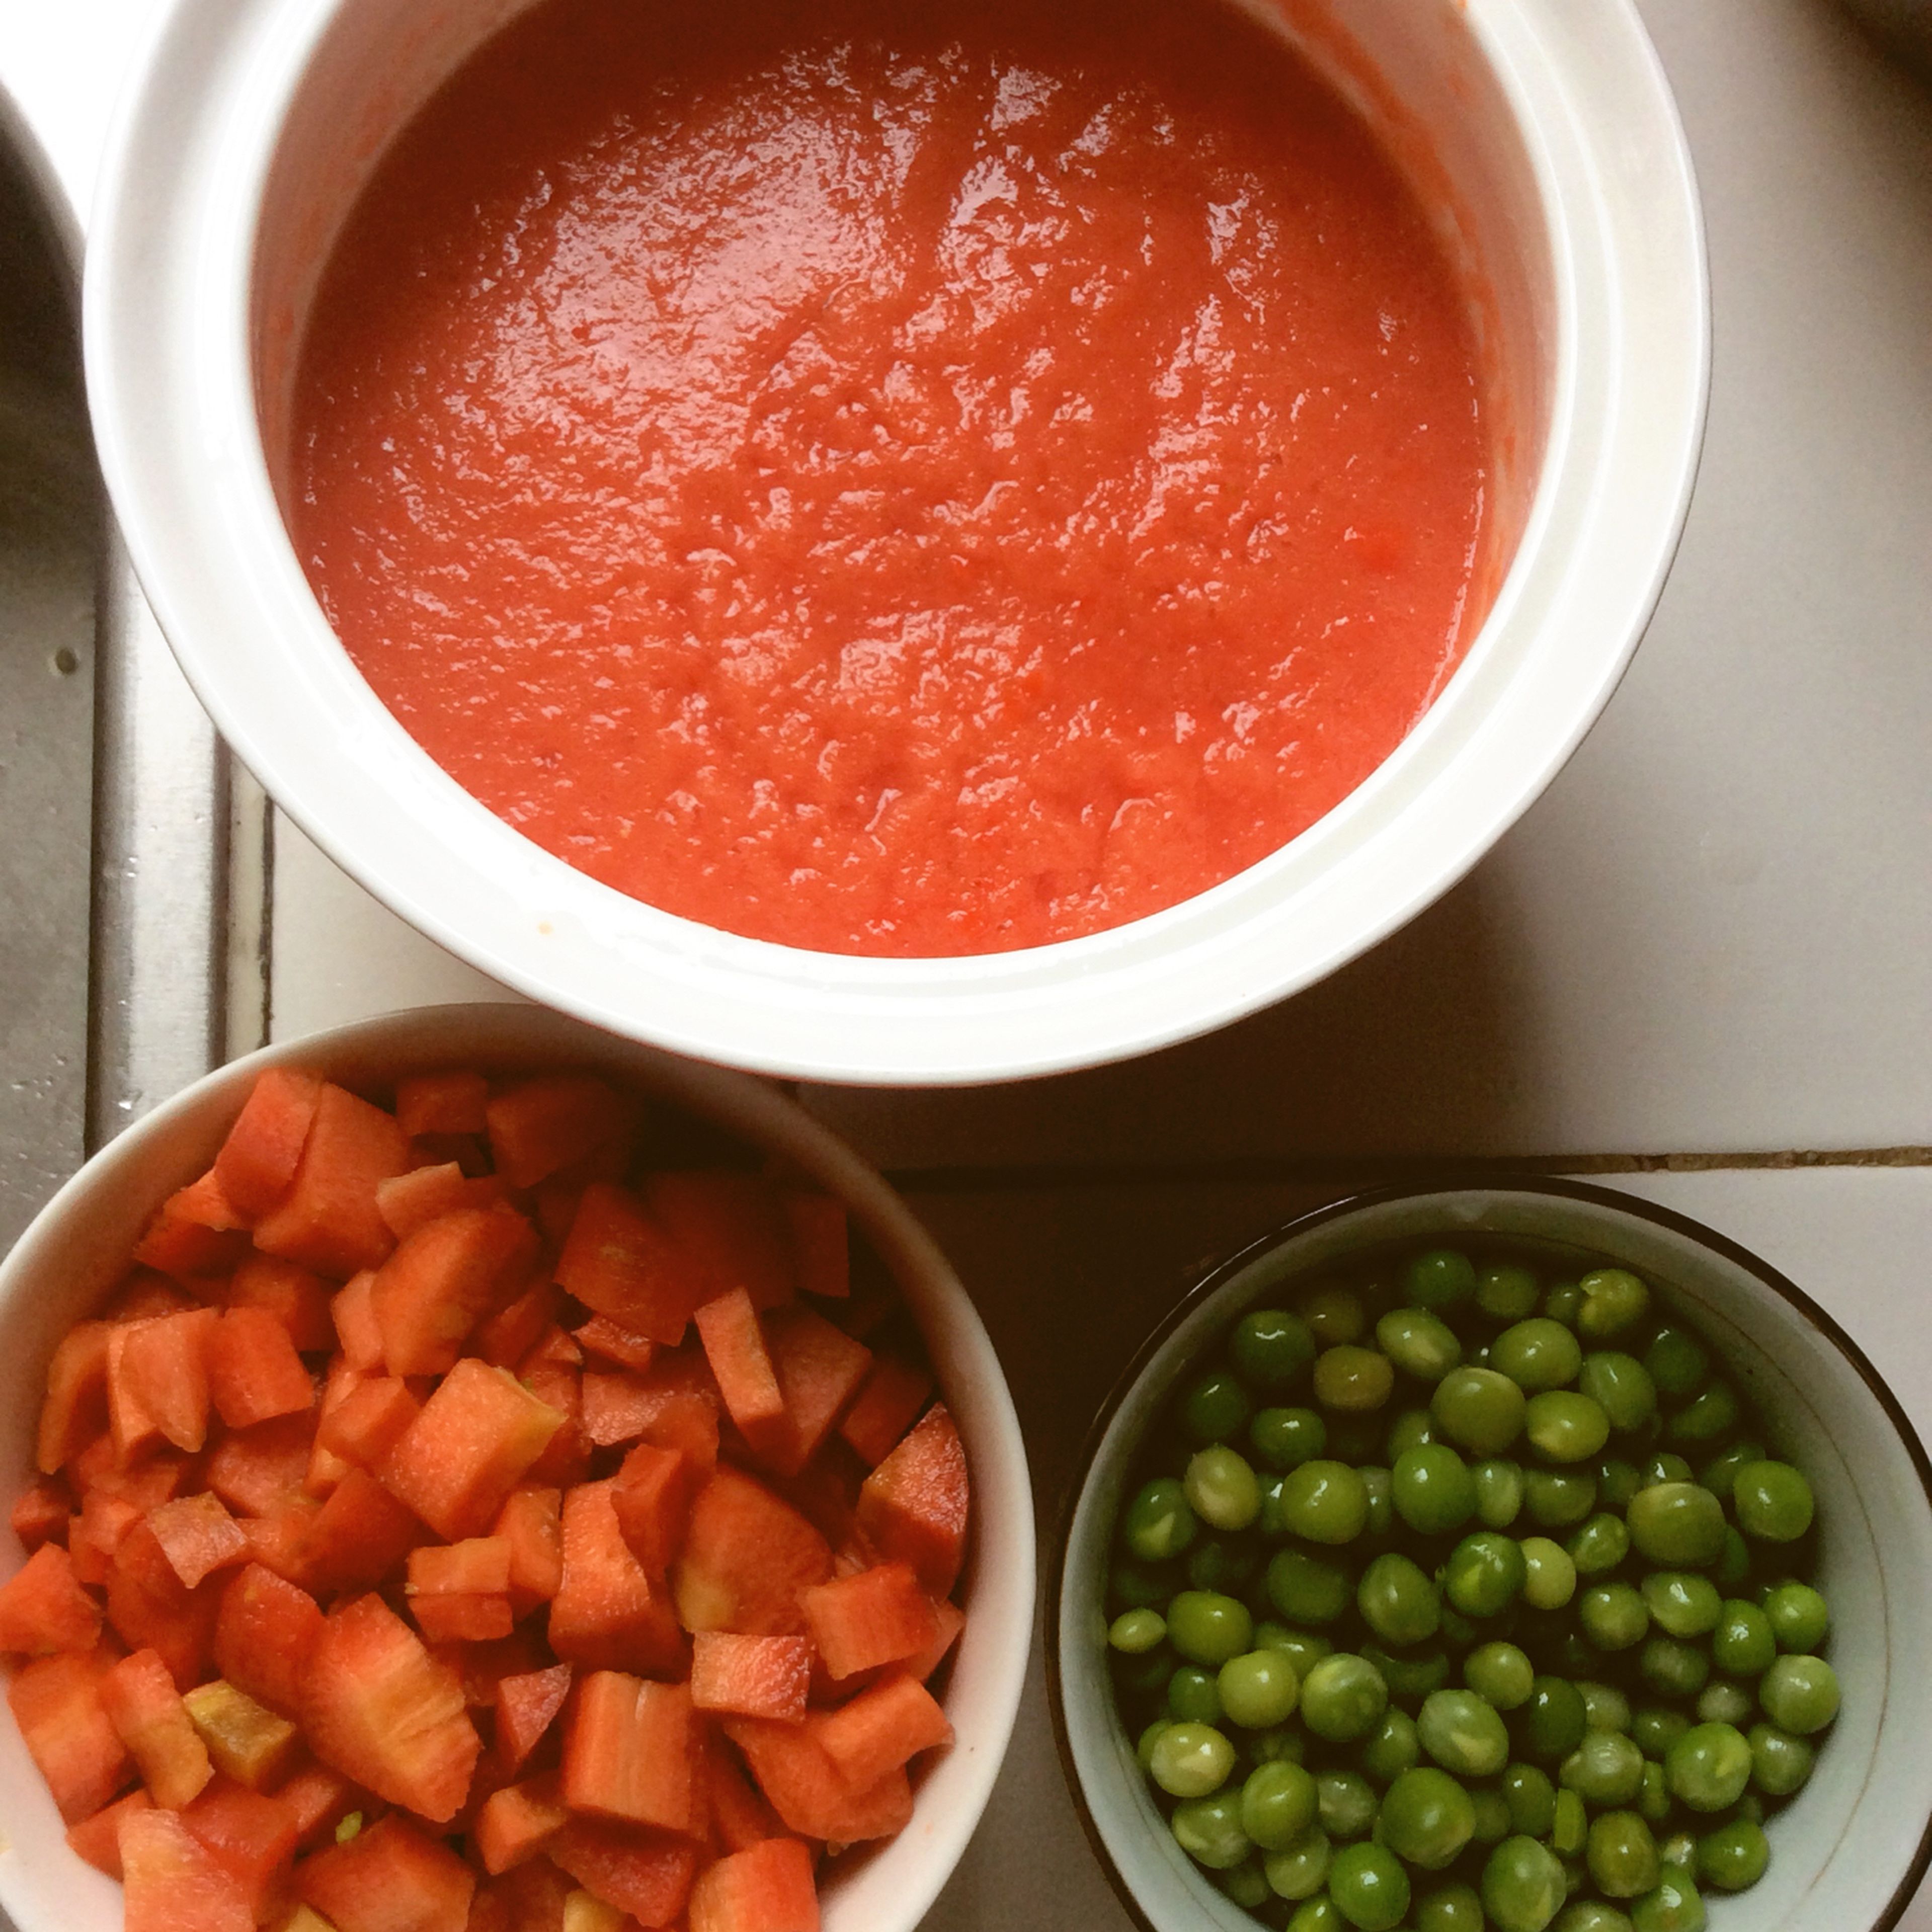 Pulse the tomatoes, bell pepper and onion into a food processor and blend to a purée.